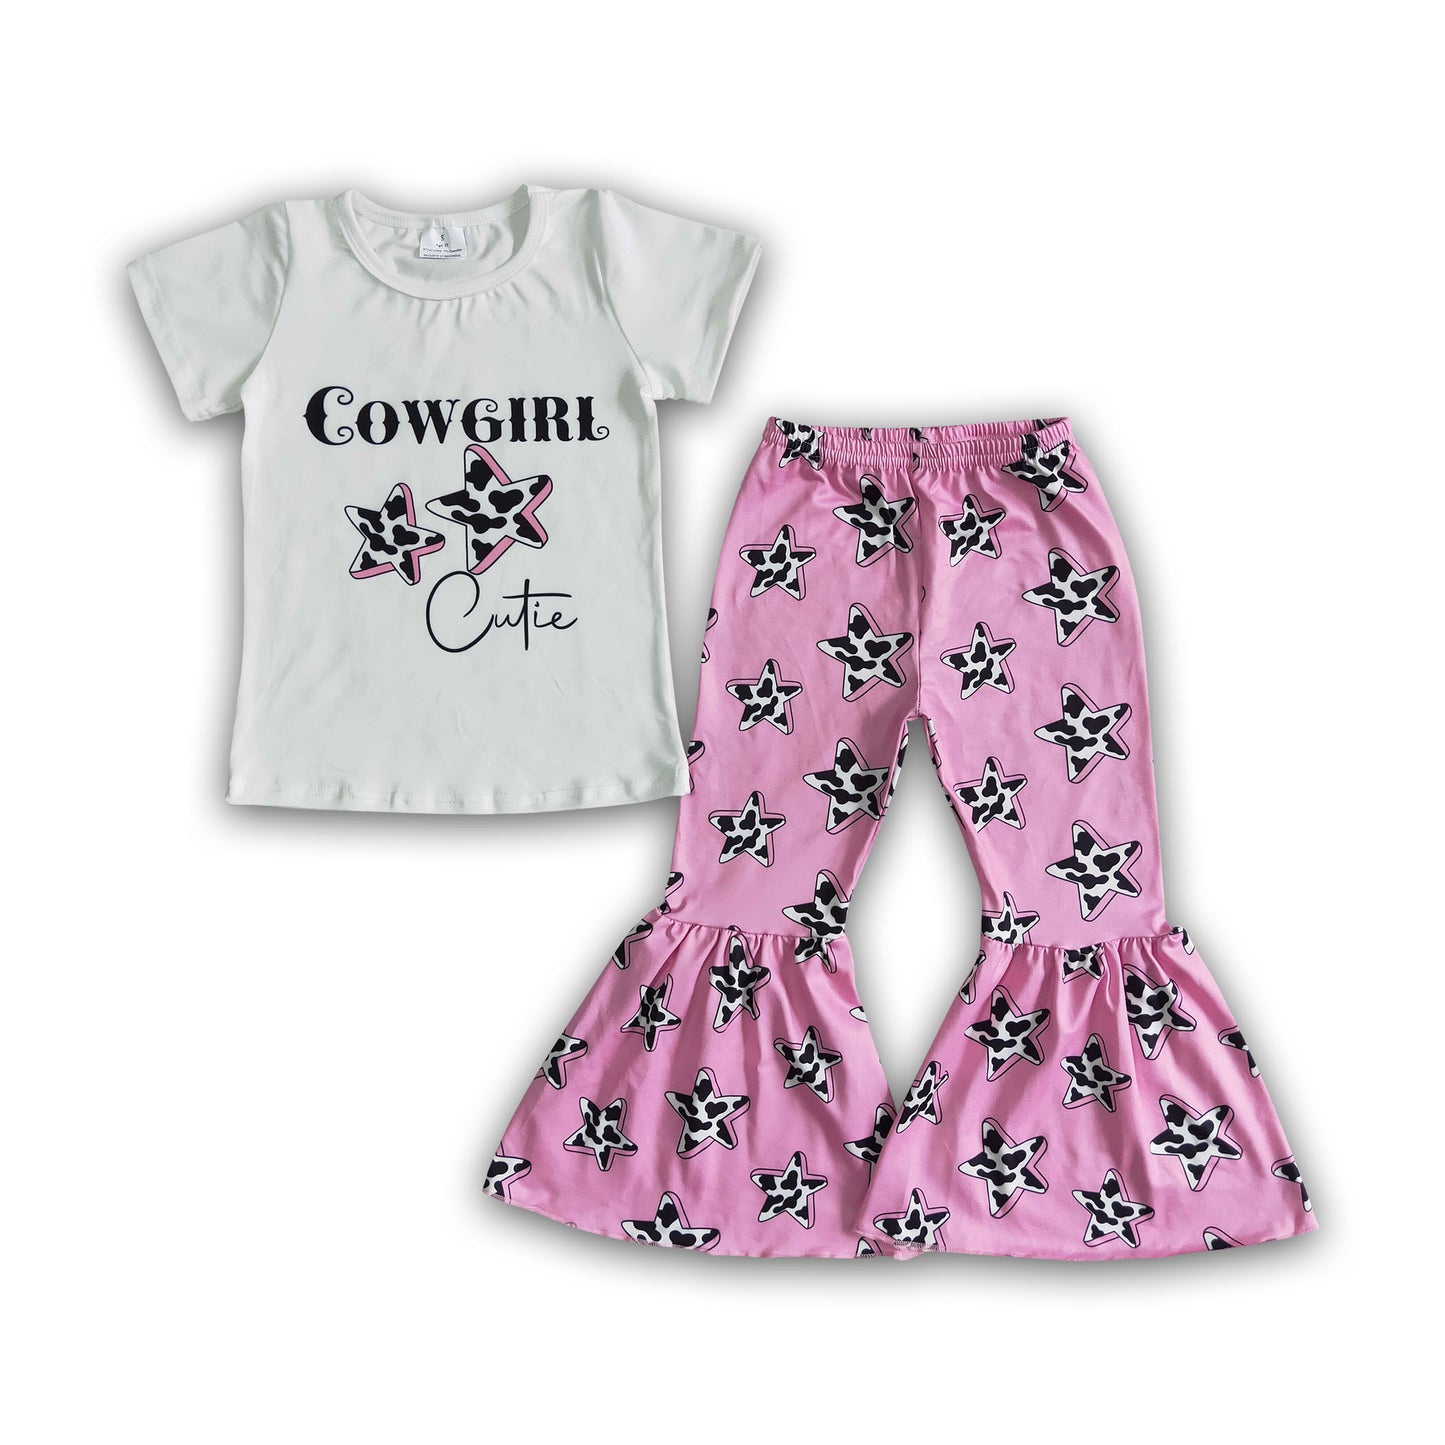 Cowgirl cutie shirt star pants girls western clothes